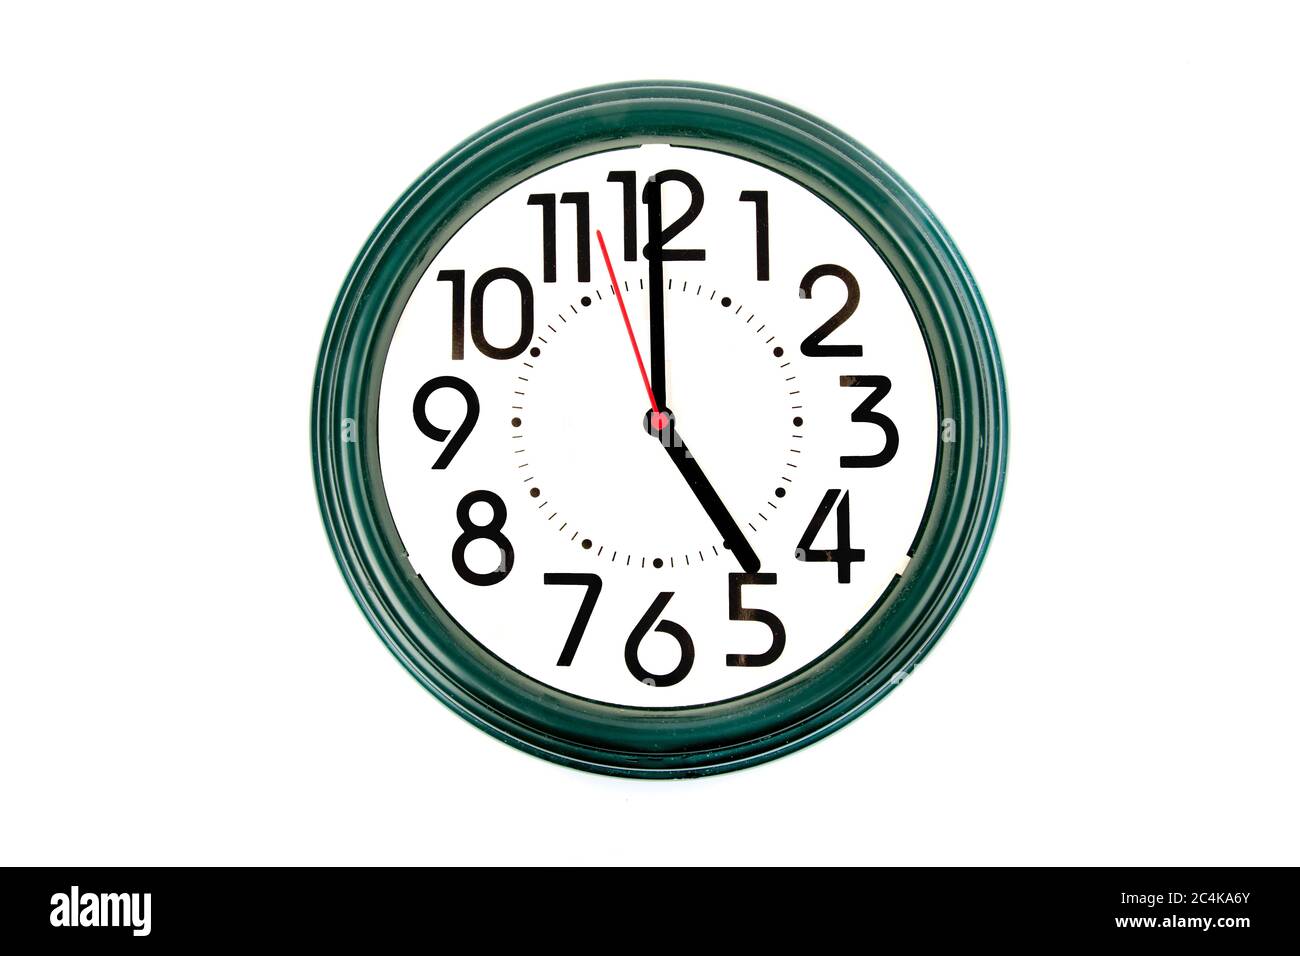 five o'clock on an old wall clock with large numbers Stock Photo